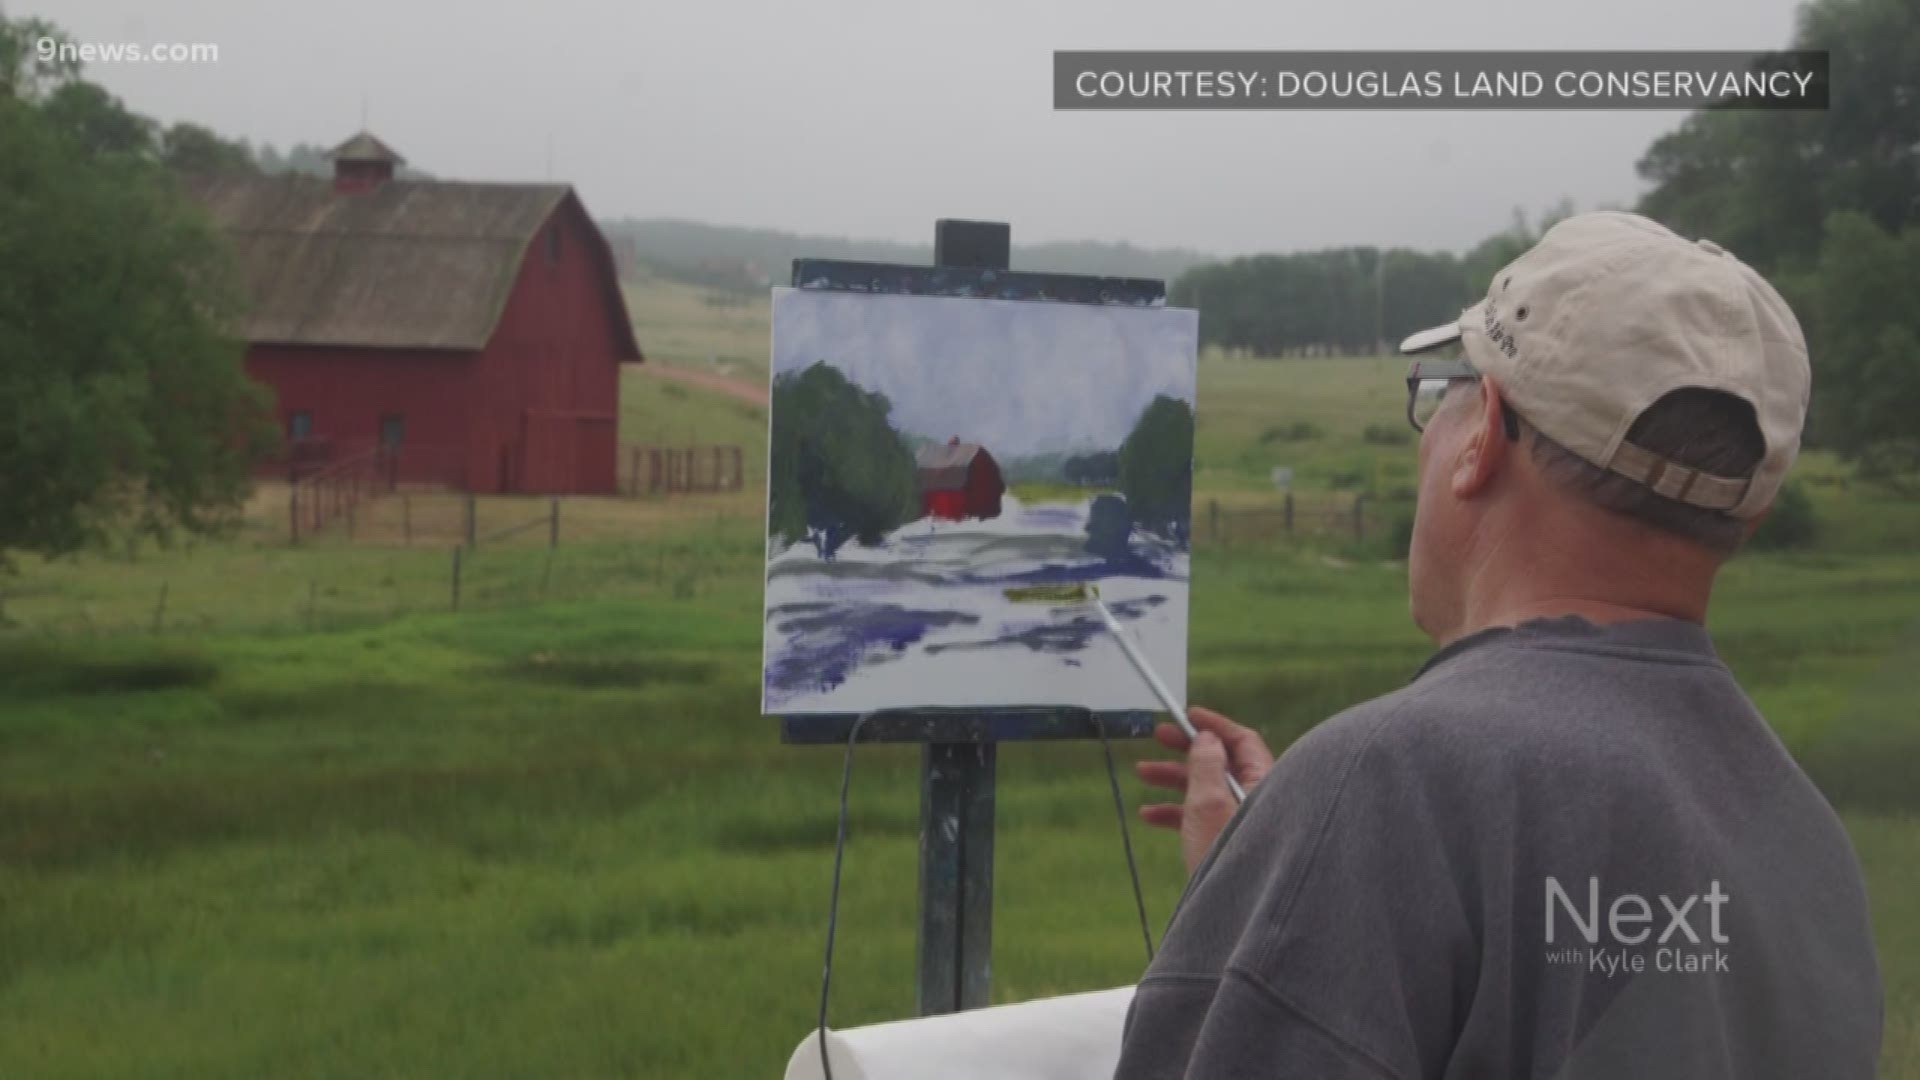 Over 200 paintings will be created throughout the week and then sold, with a portion of the proceeds benefiting the Douglas Land Conservancy.